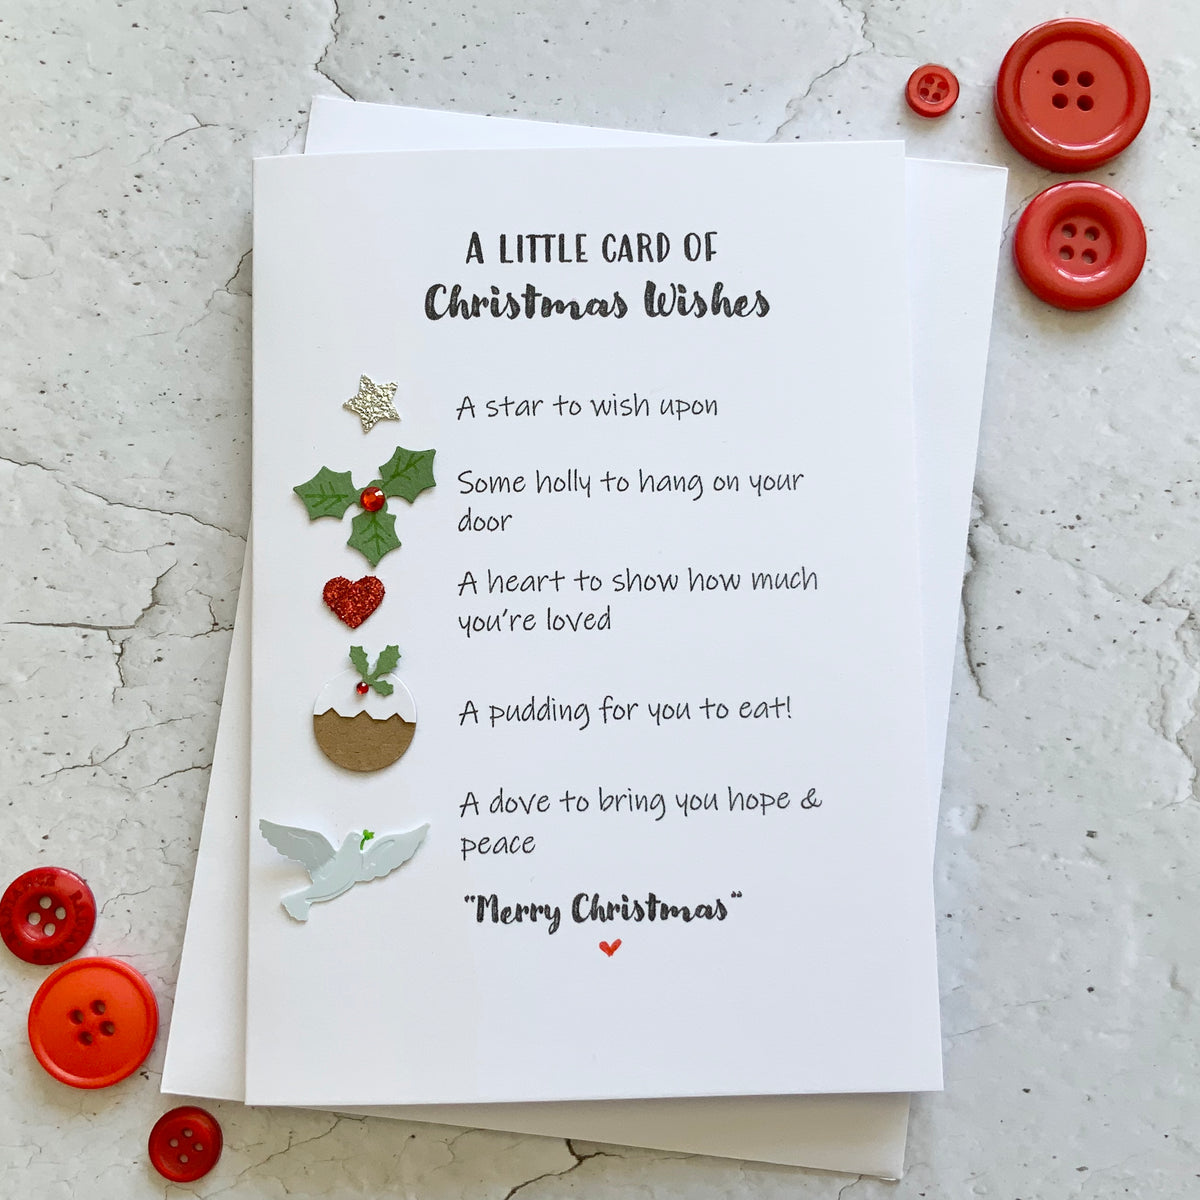 Little Card Of Christmas Wishes (non-alcoholic) – Made By Jennie